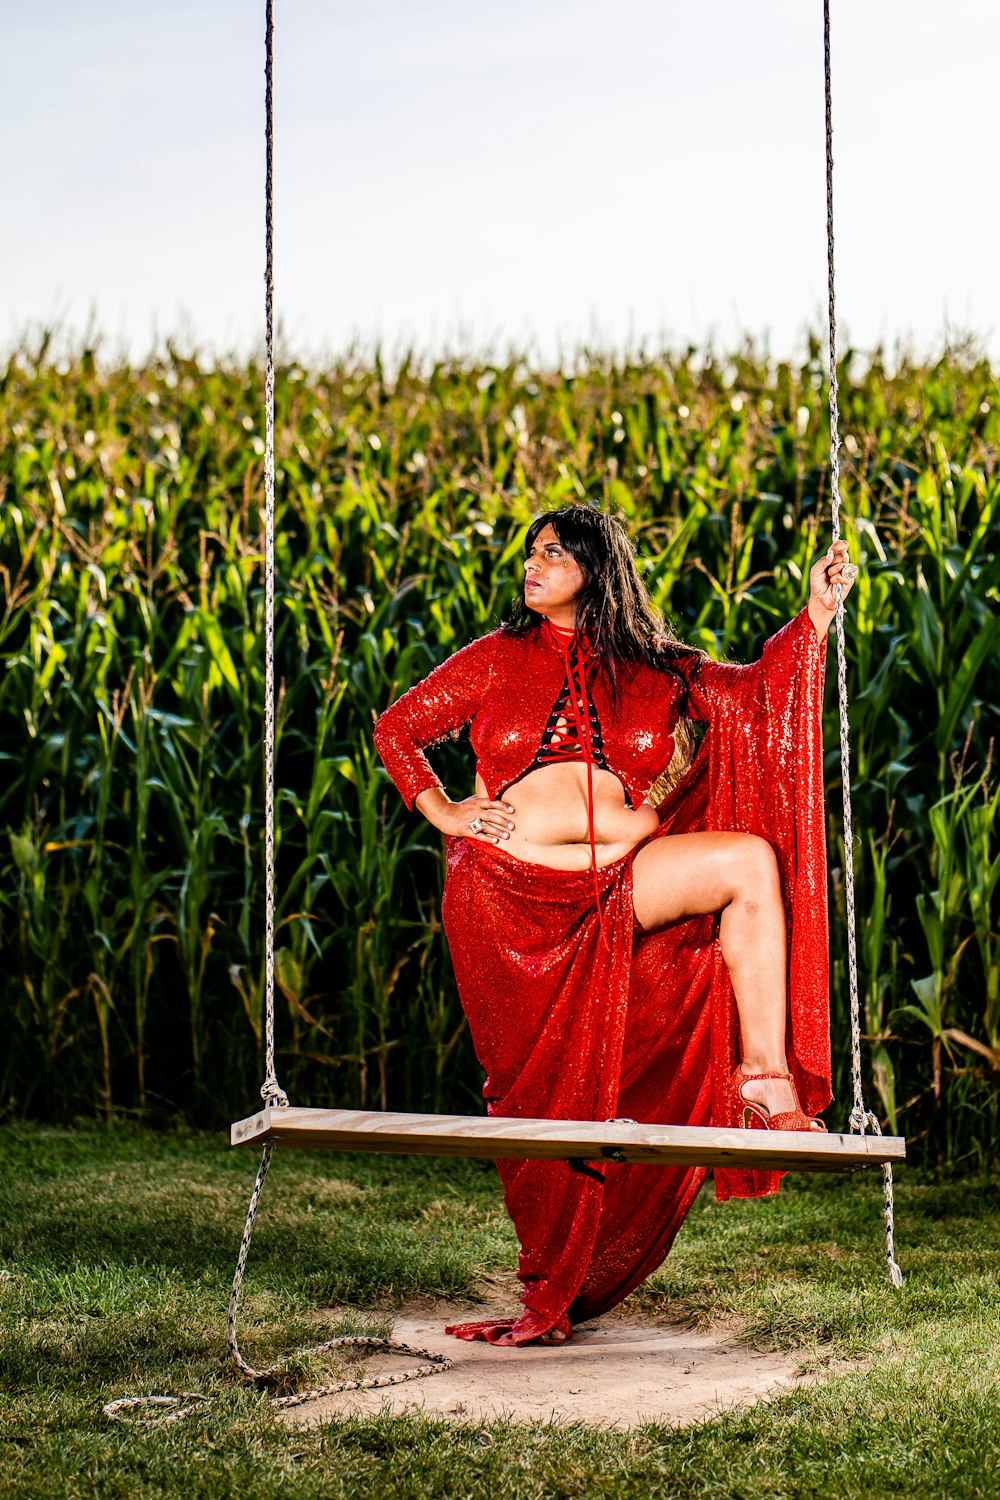 woman in red dress sitting on red hammock